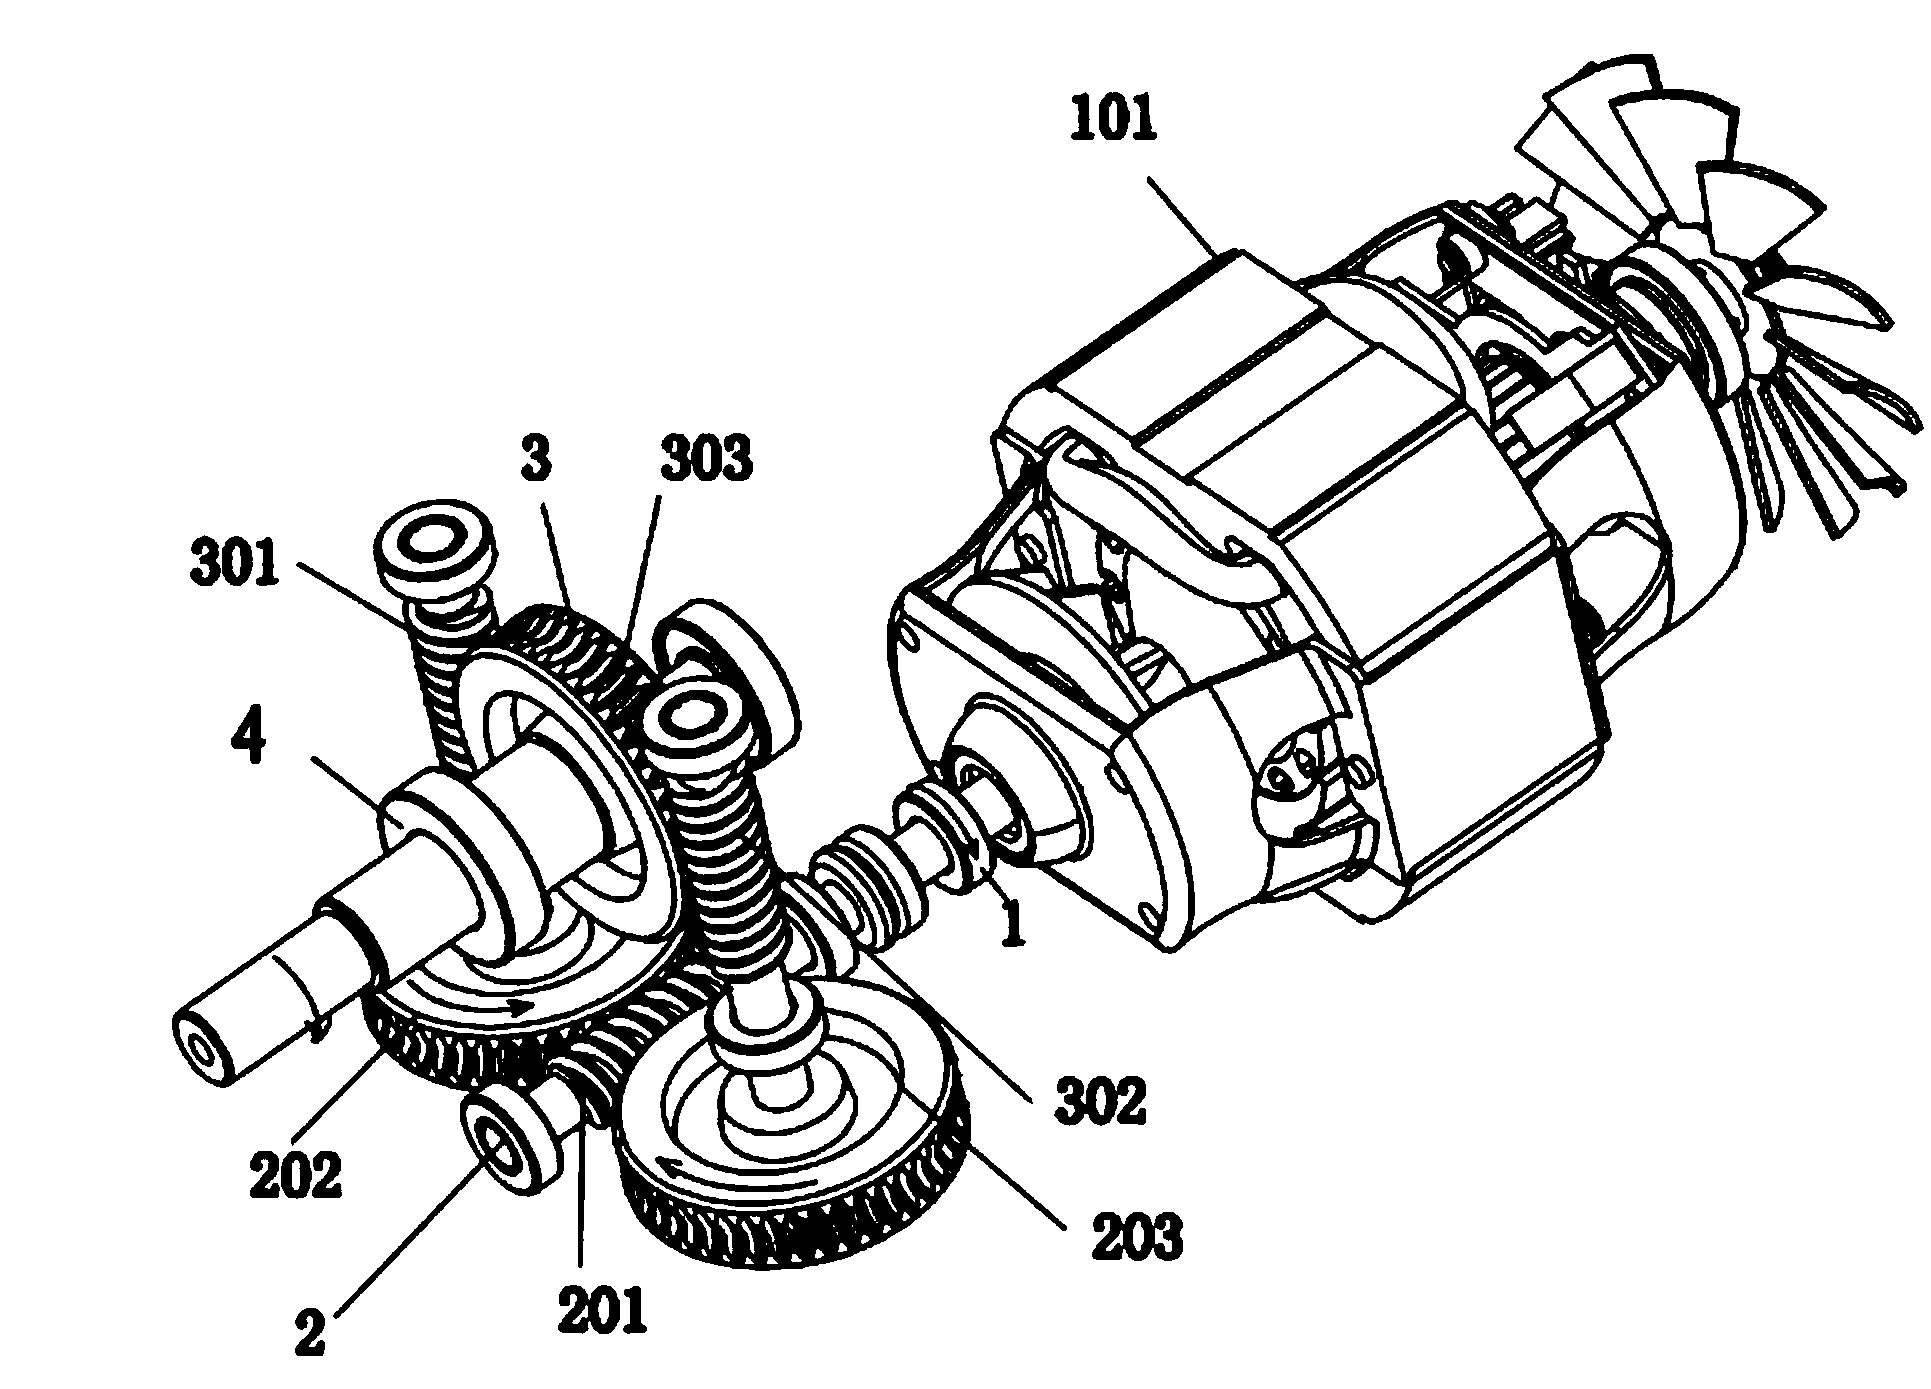 A worm and worm gear decelerating mechanism